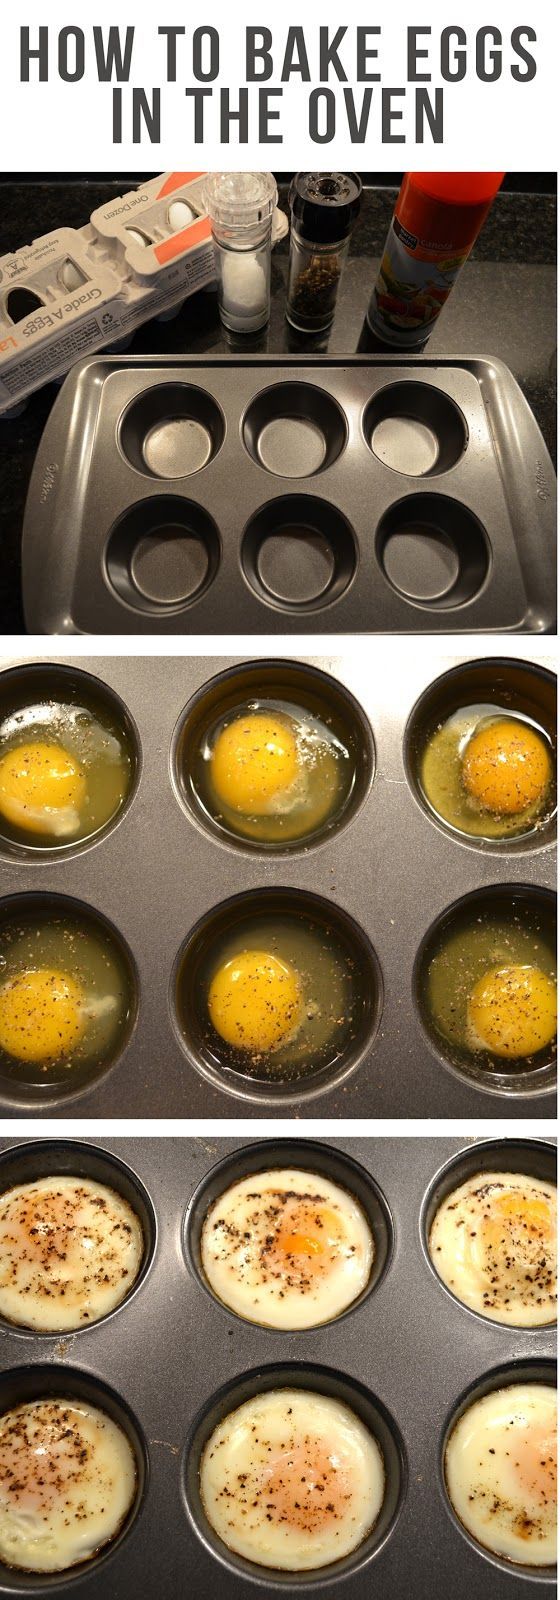 No peeling egg shells off! Good snack thatll hold you a while  How to Bake Eggs in the Oven